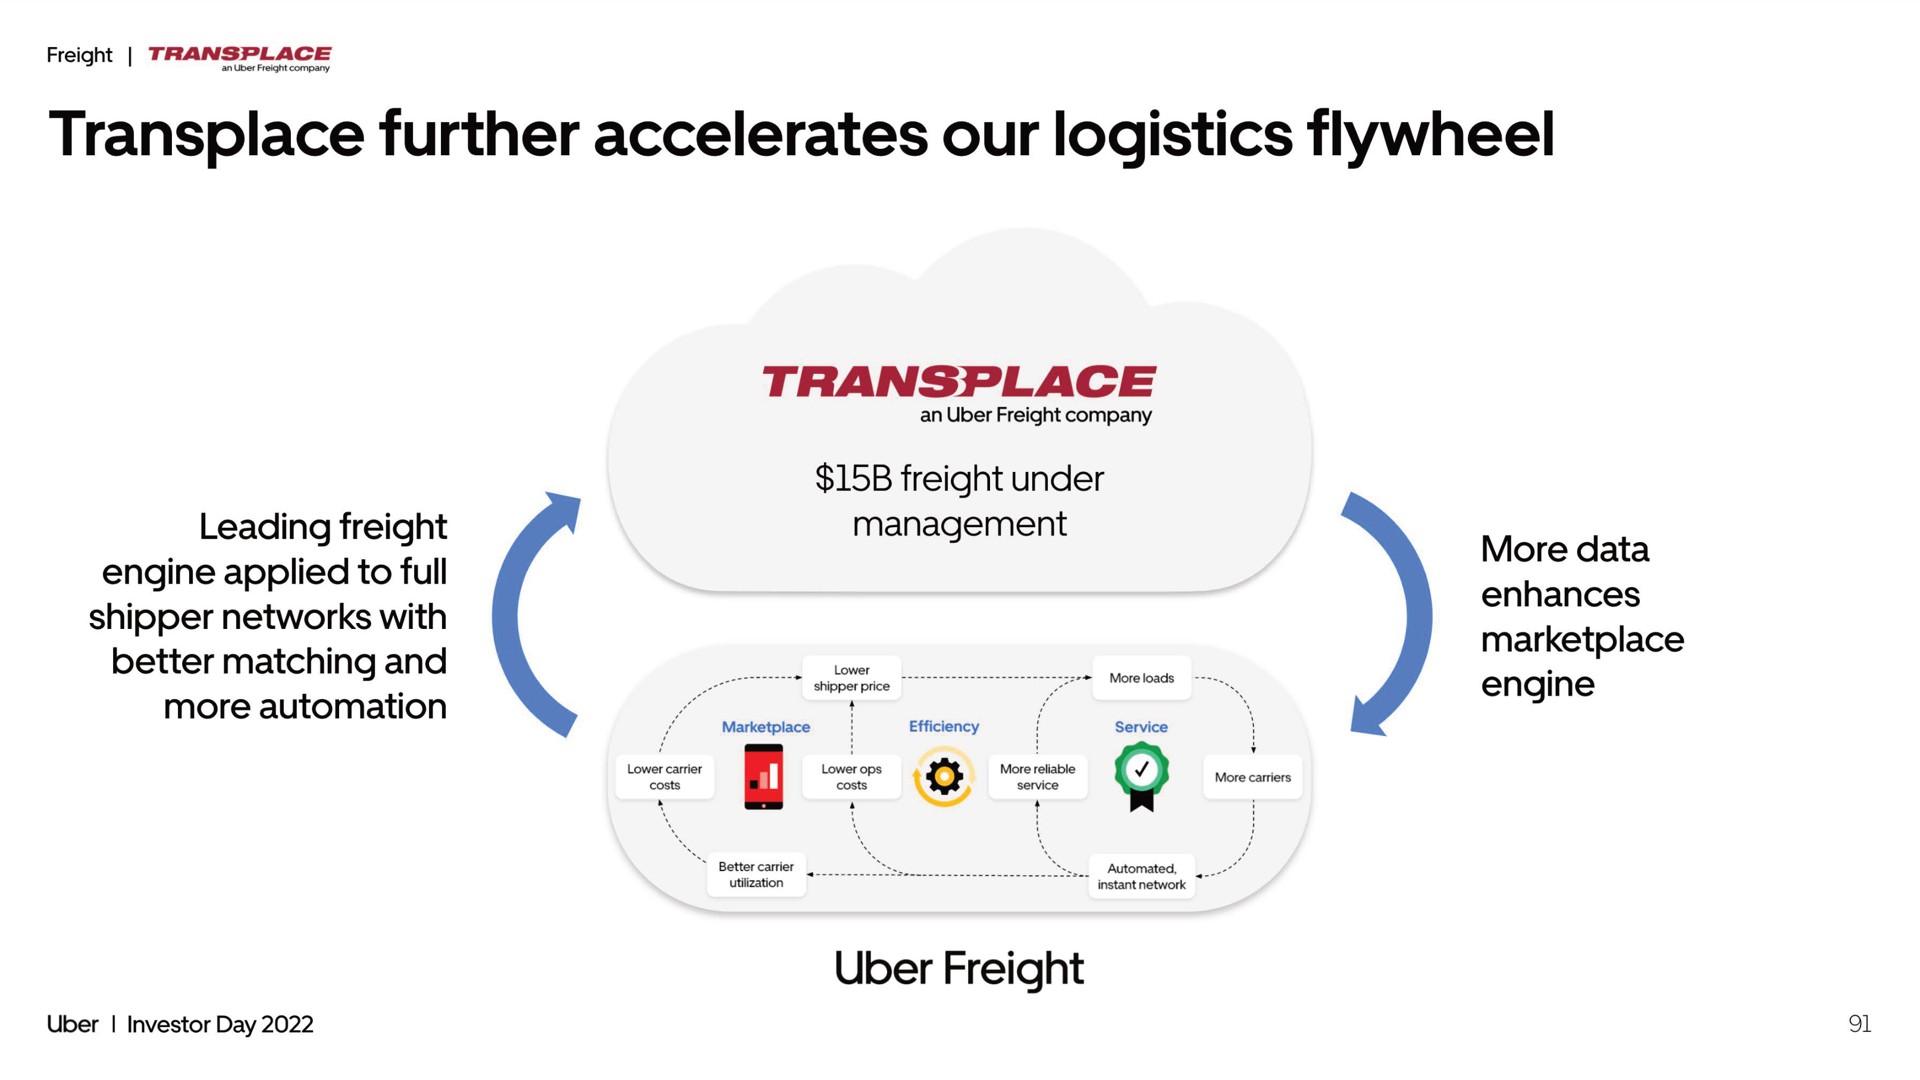 transplace further accelerates our logistics flywheel freight | Uber